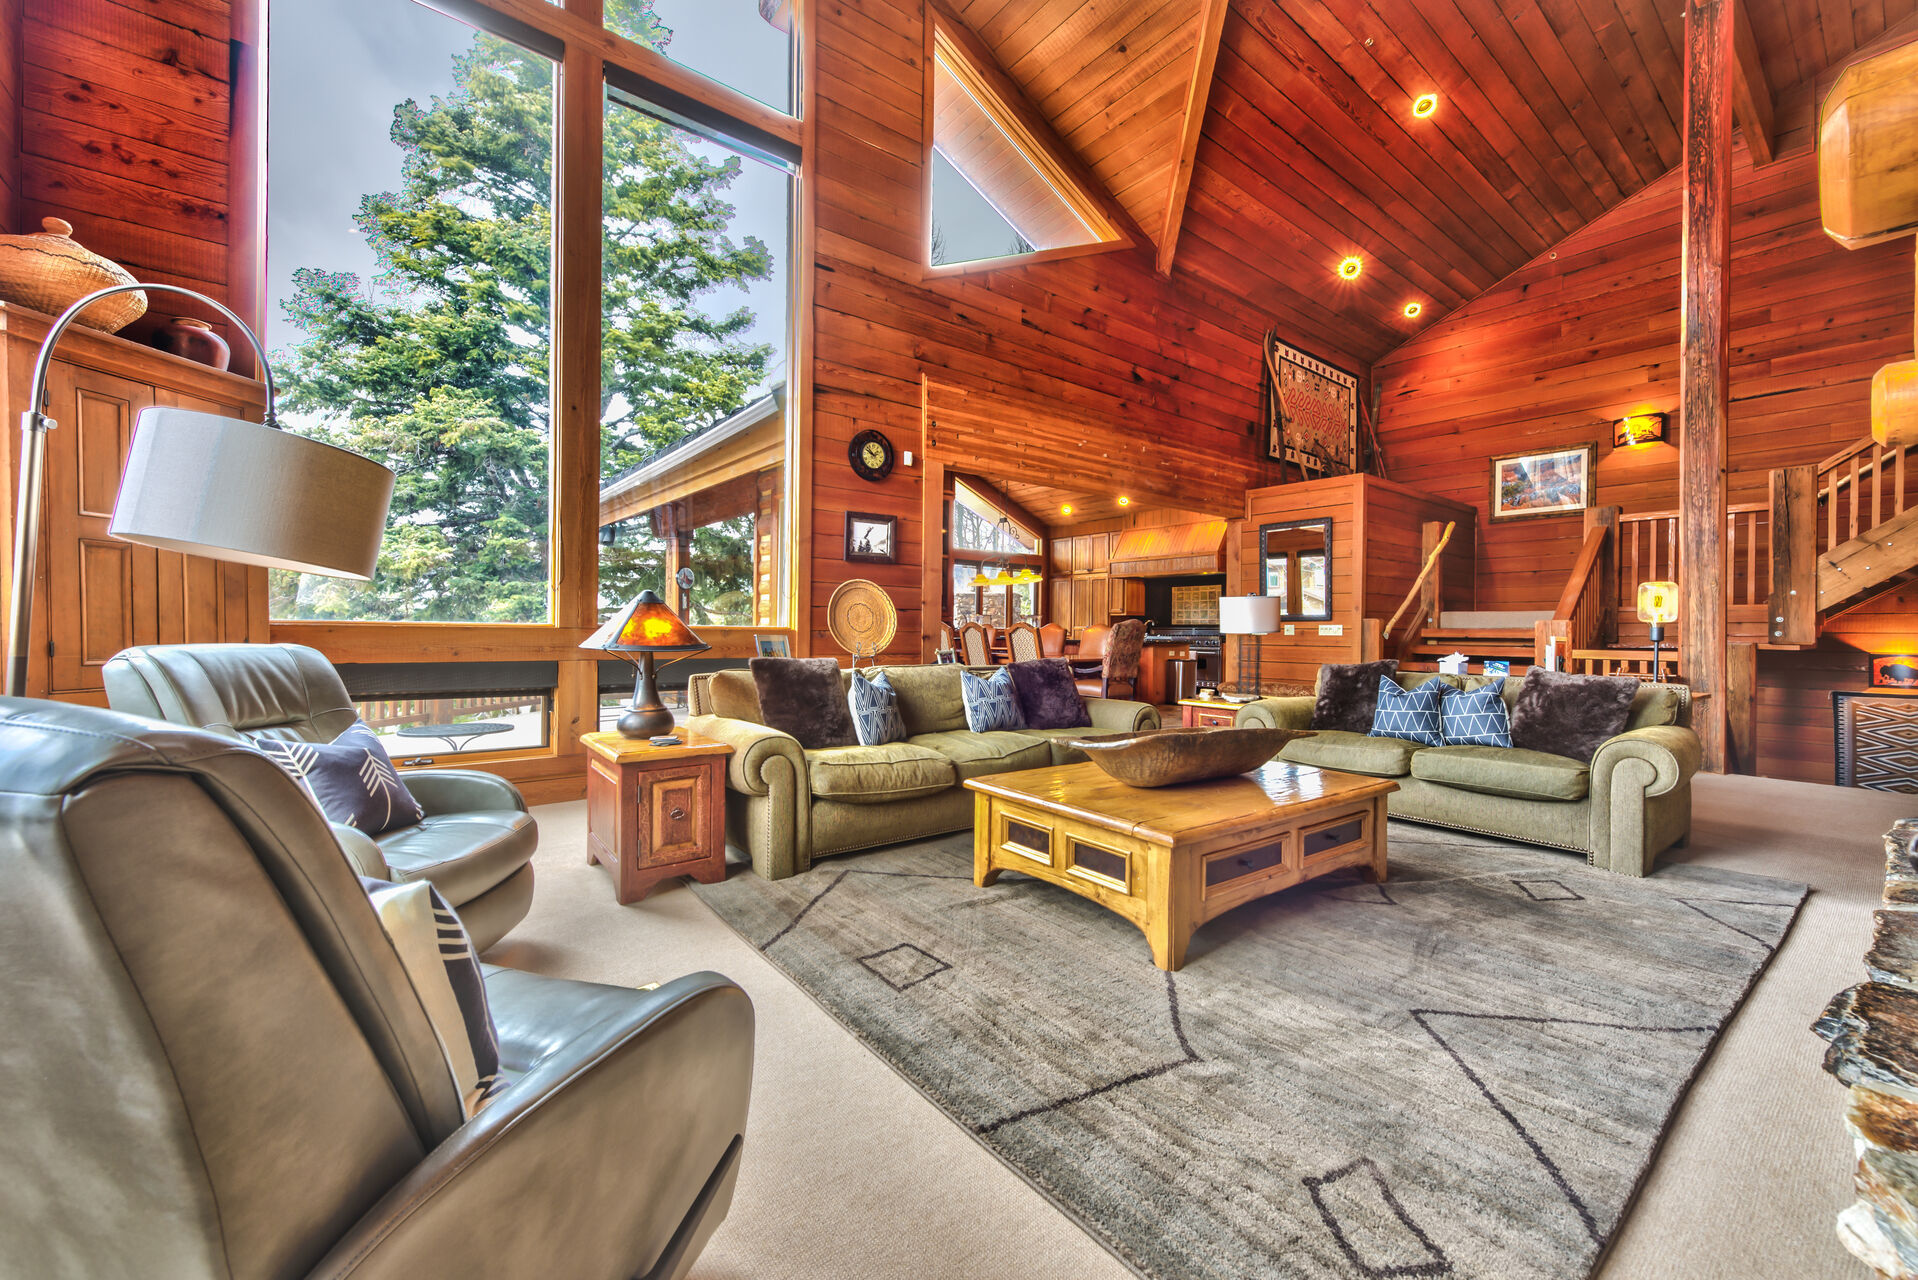 Living Area and Windows with Mountain View in Our Deer Valley Utah, Vacation Rentals.